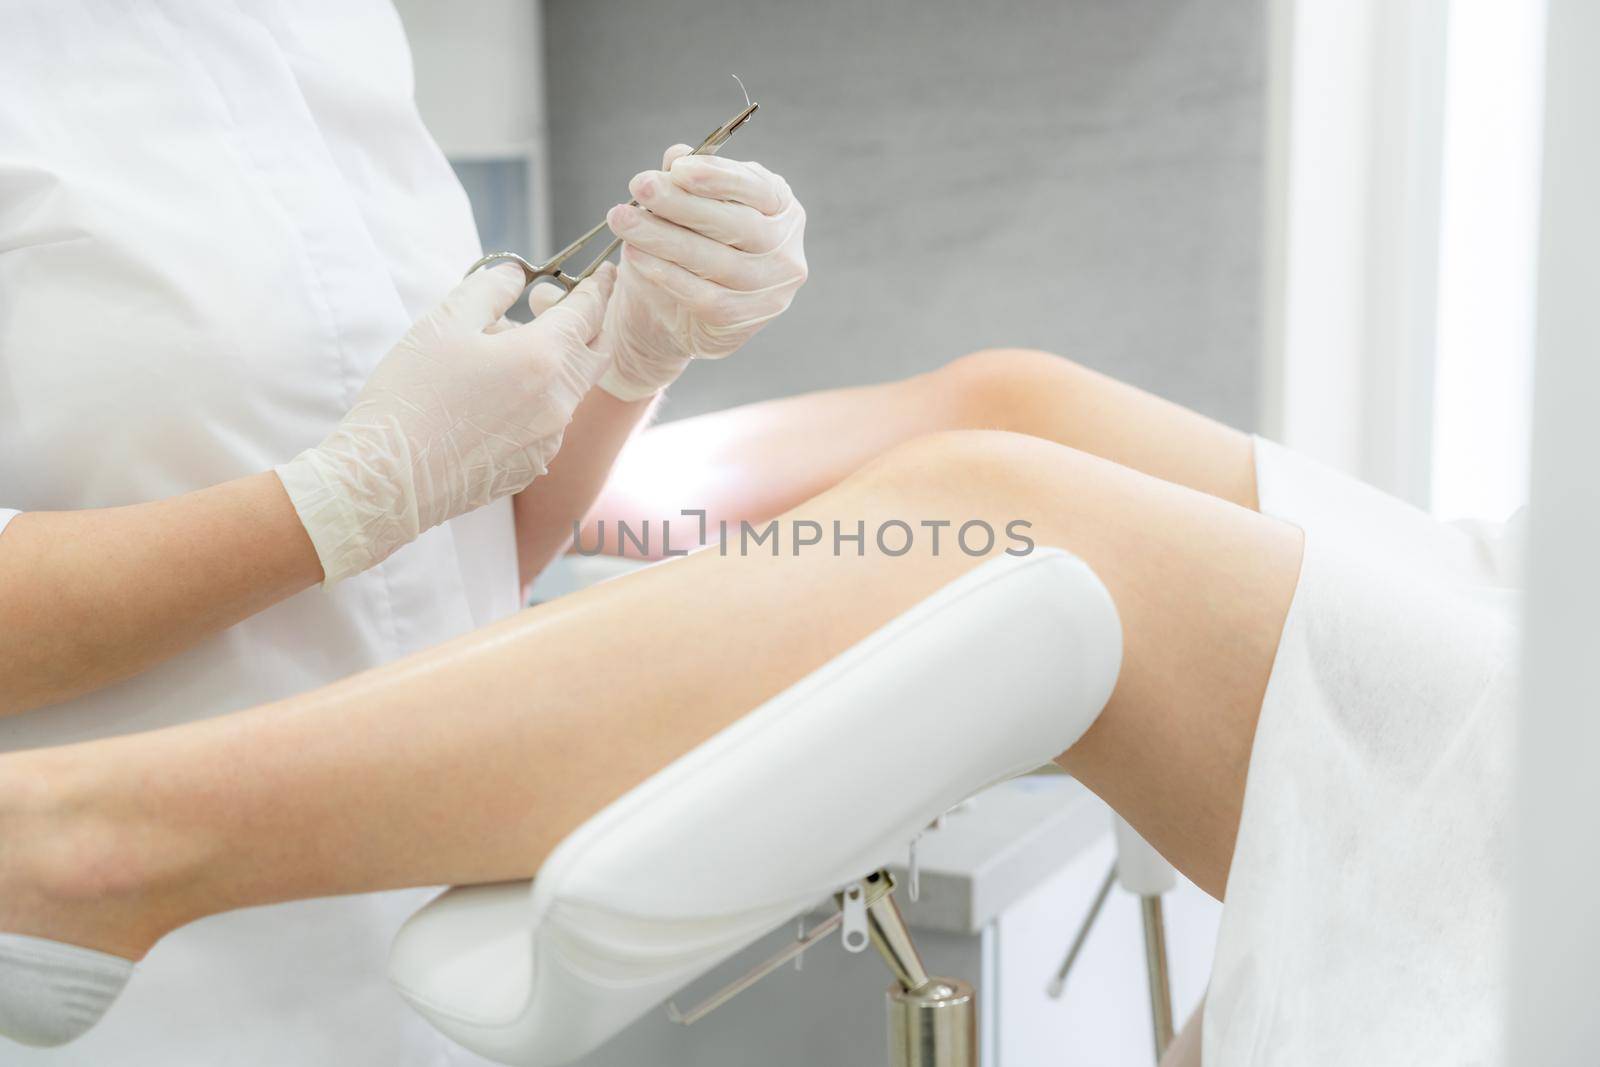 Gynecologist holding needle for stitching before surgery by Mariakray